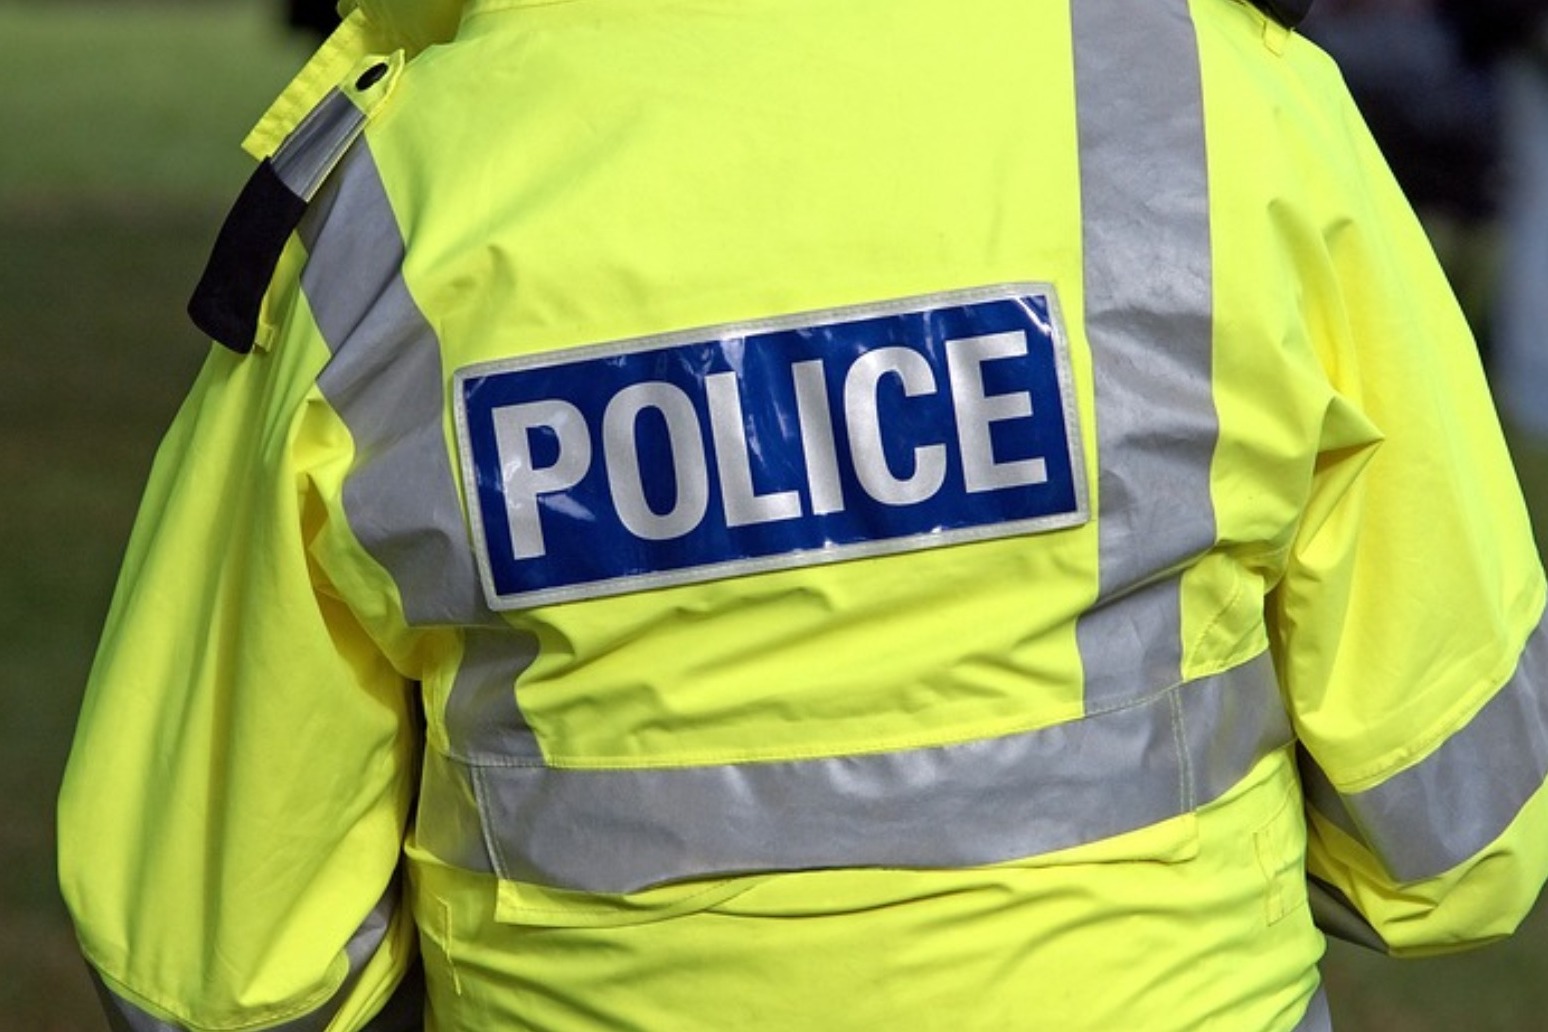 Police officer found guilty of submitting false insurance claims and personal injuries. 